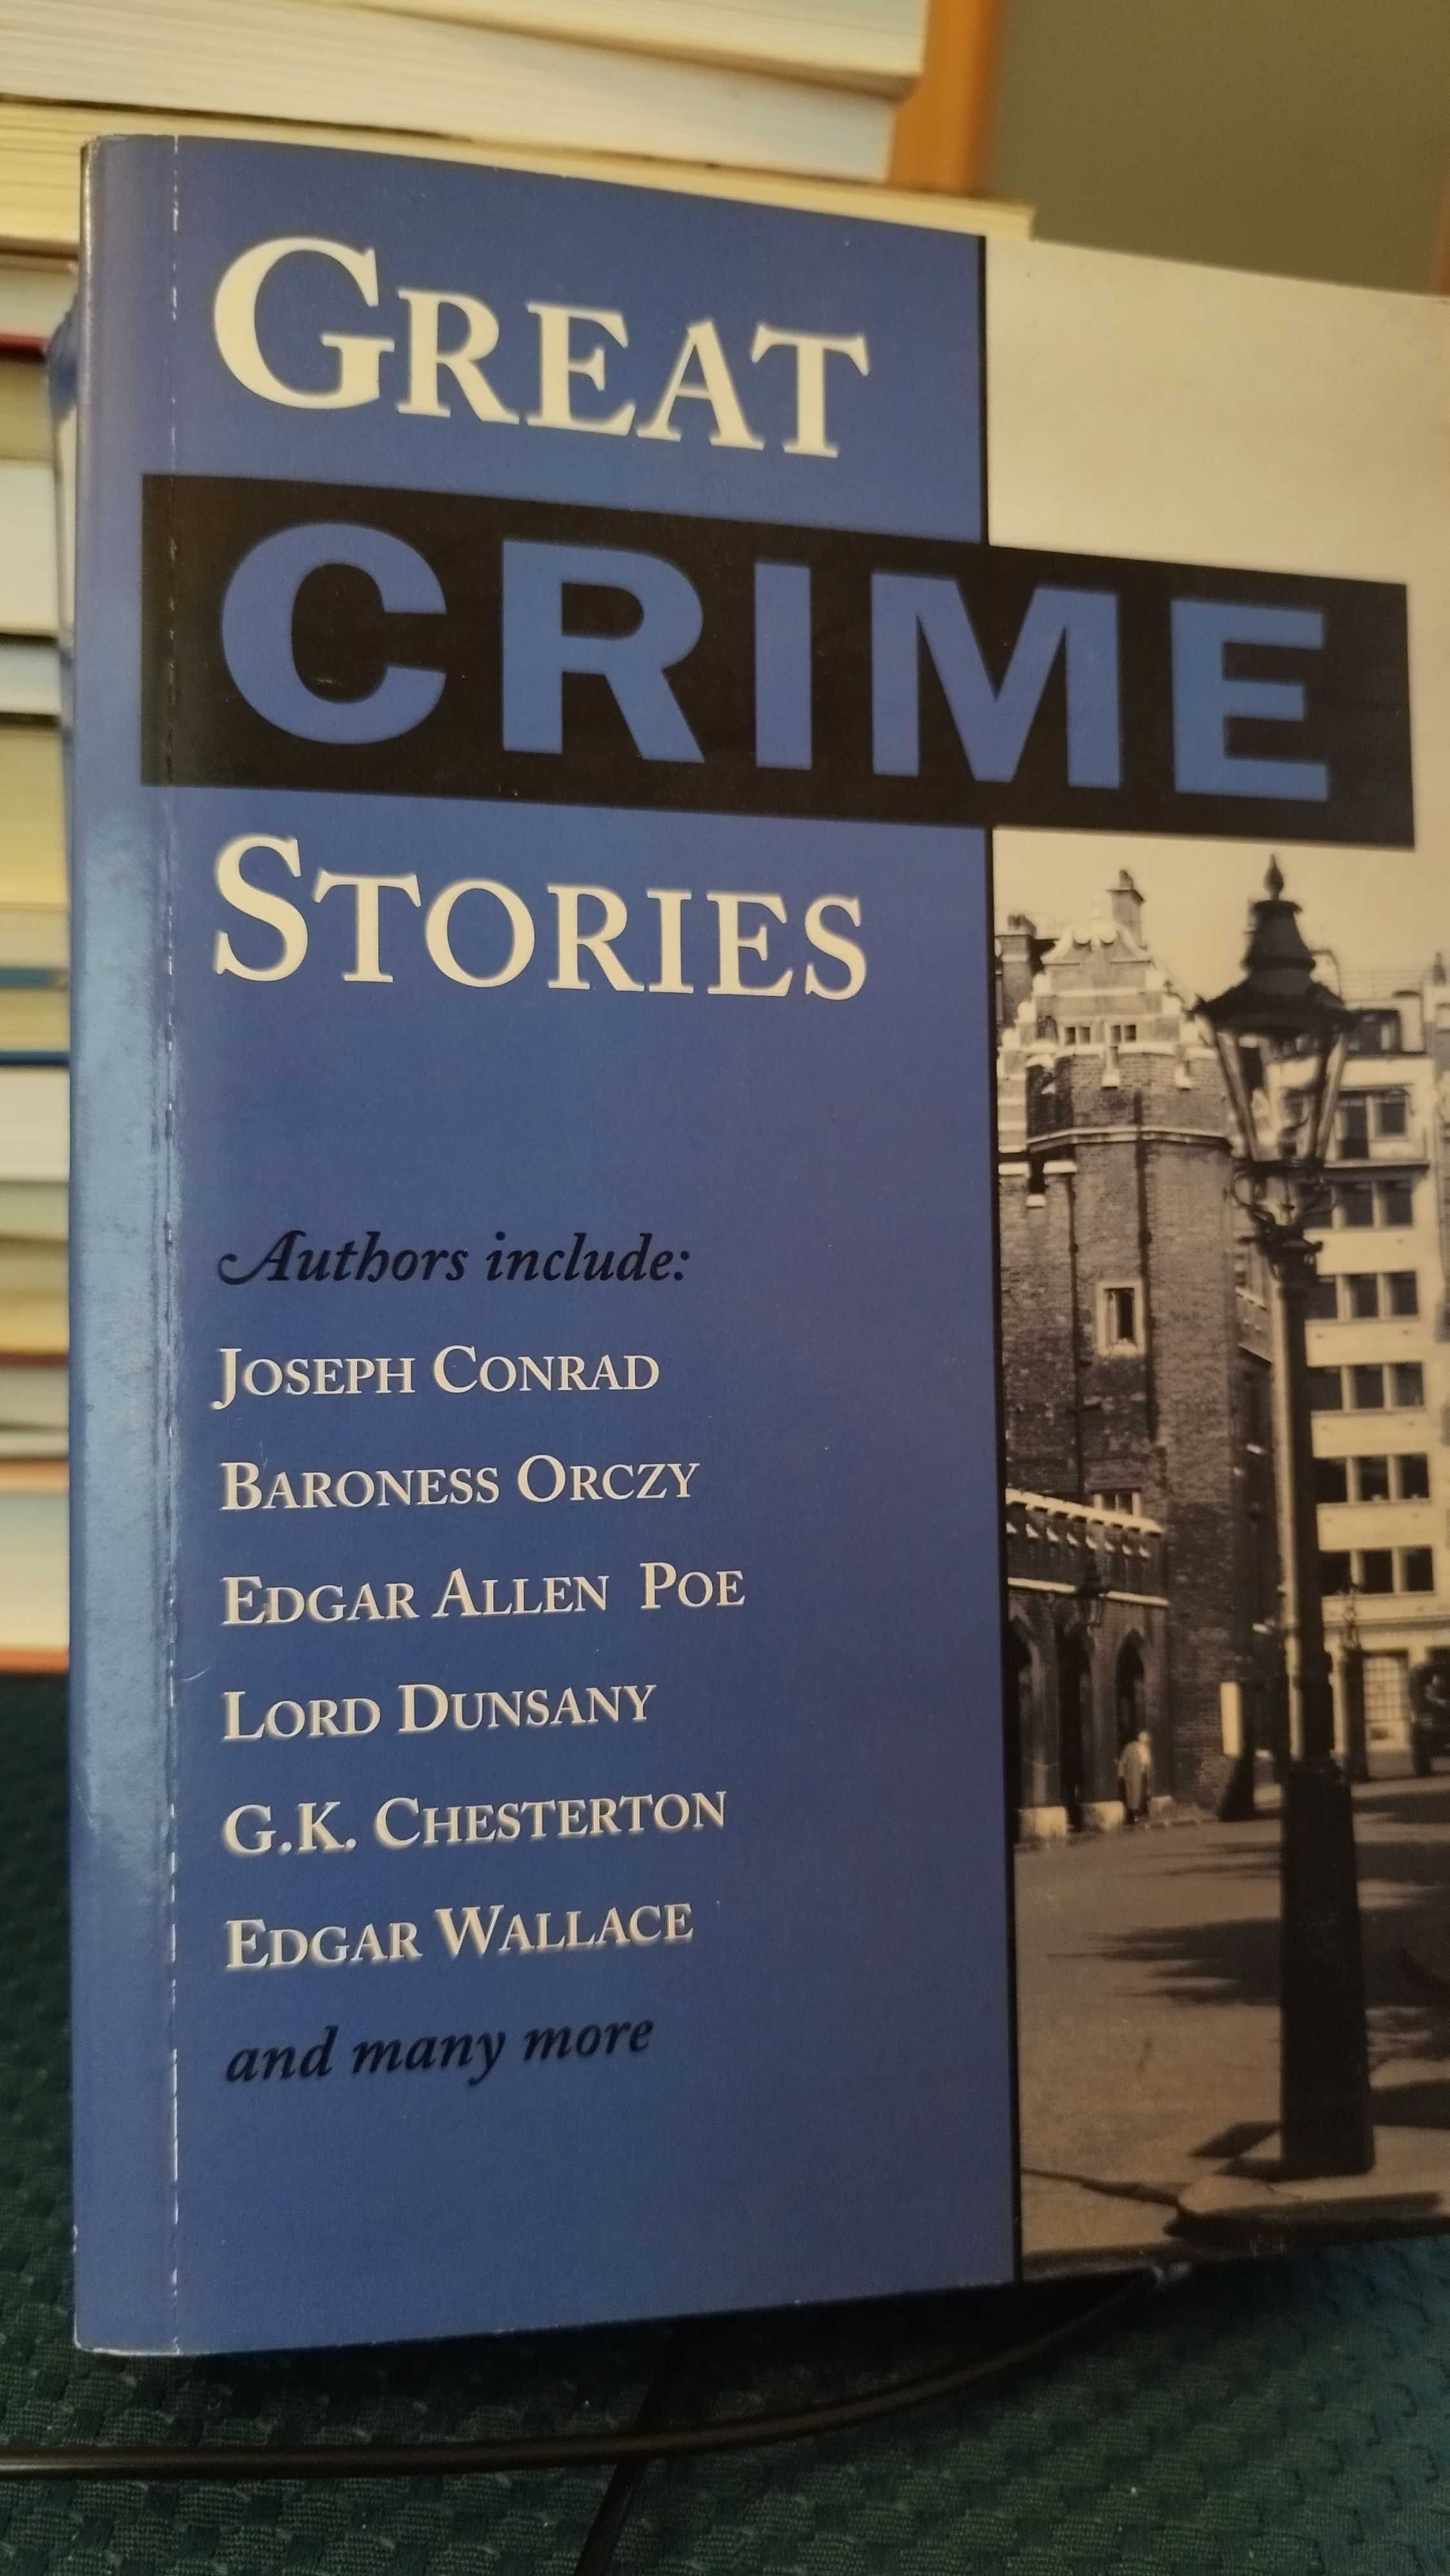 Great Crimes Stories